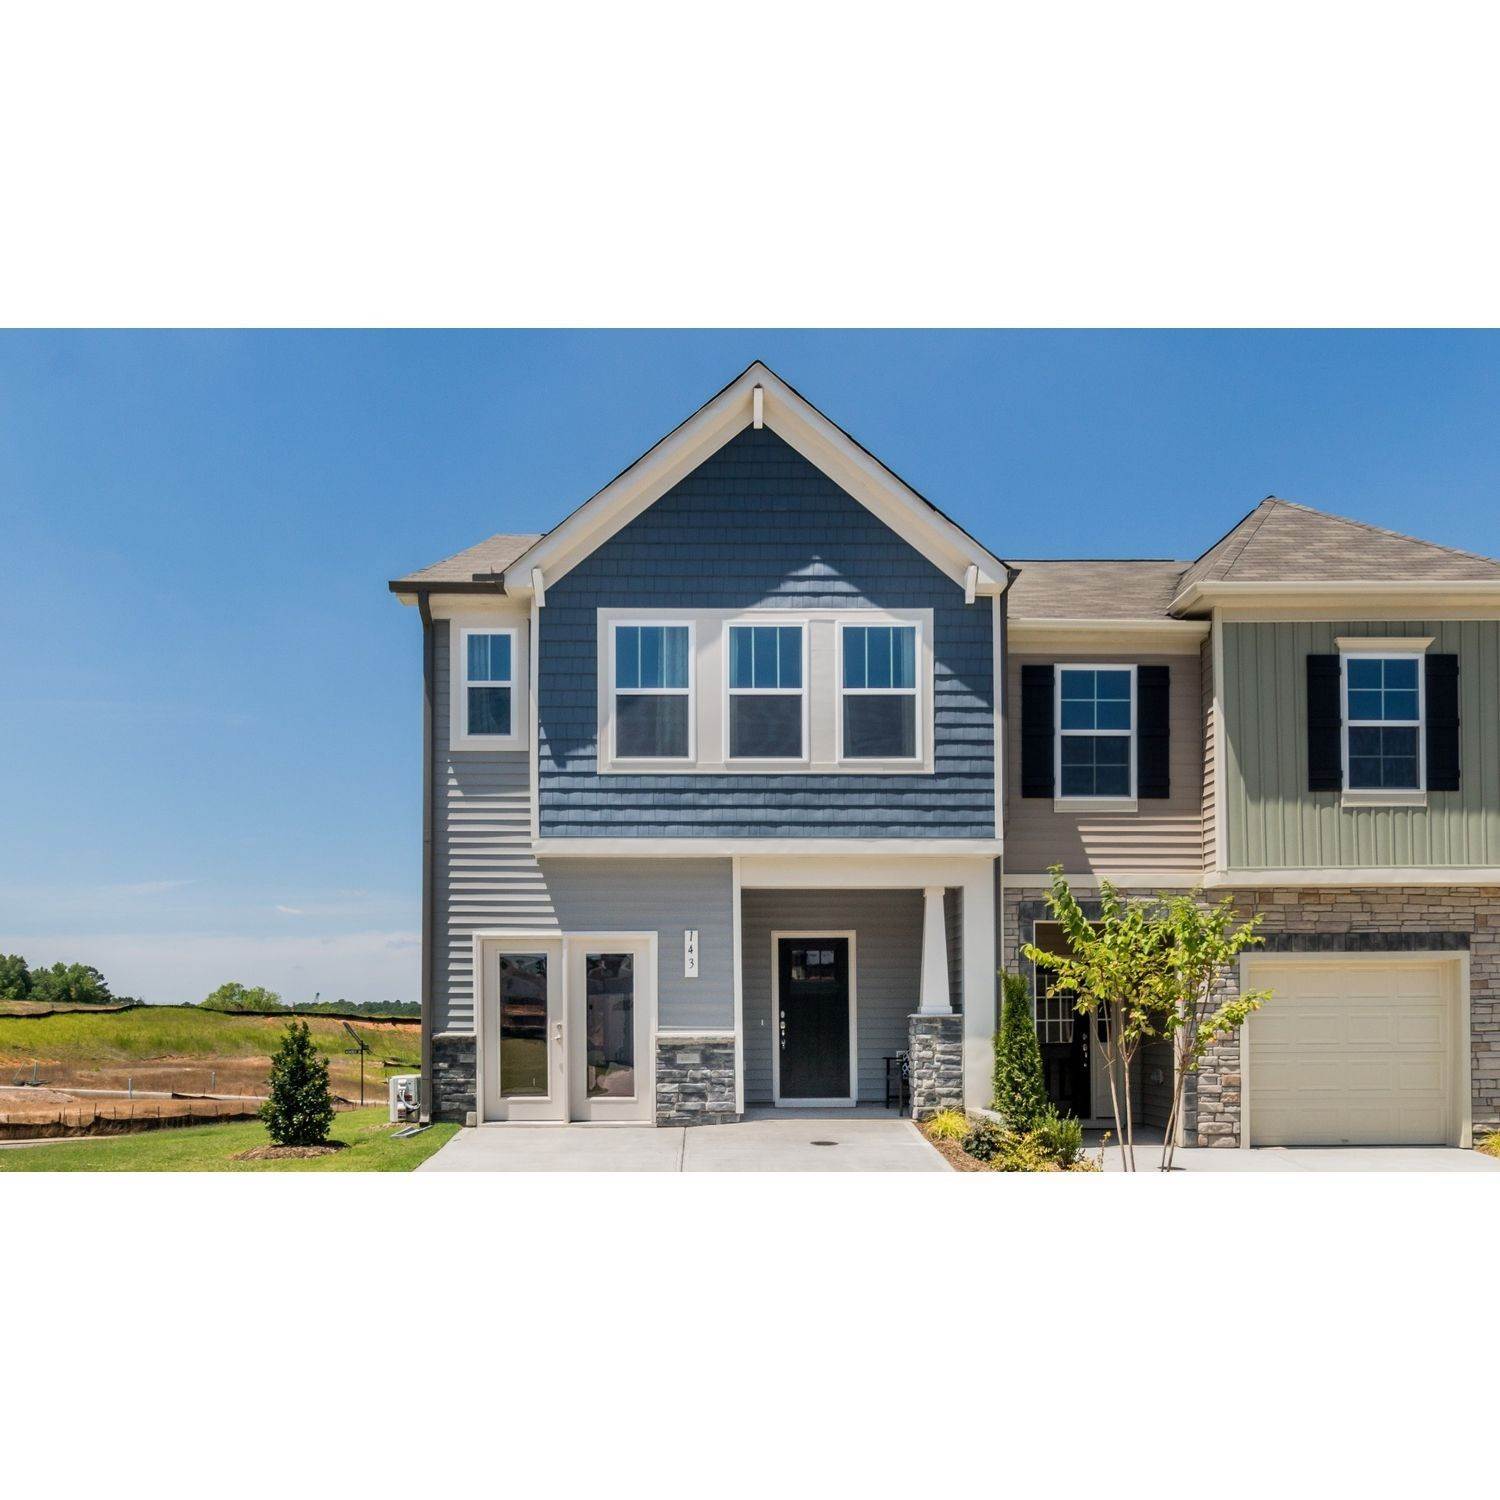 1133 Chalybeate Springs Road, Angier, NC 27501에 Spring Village Townhomes 건물